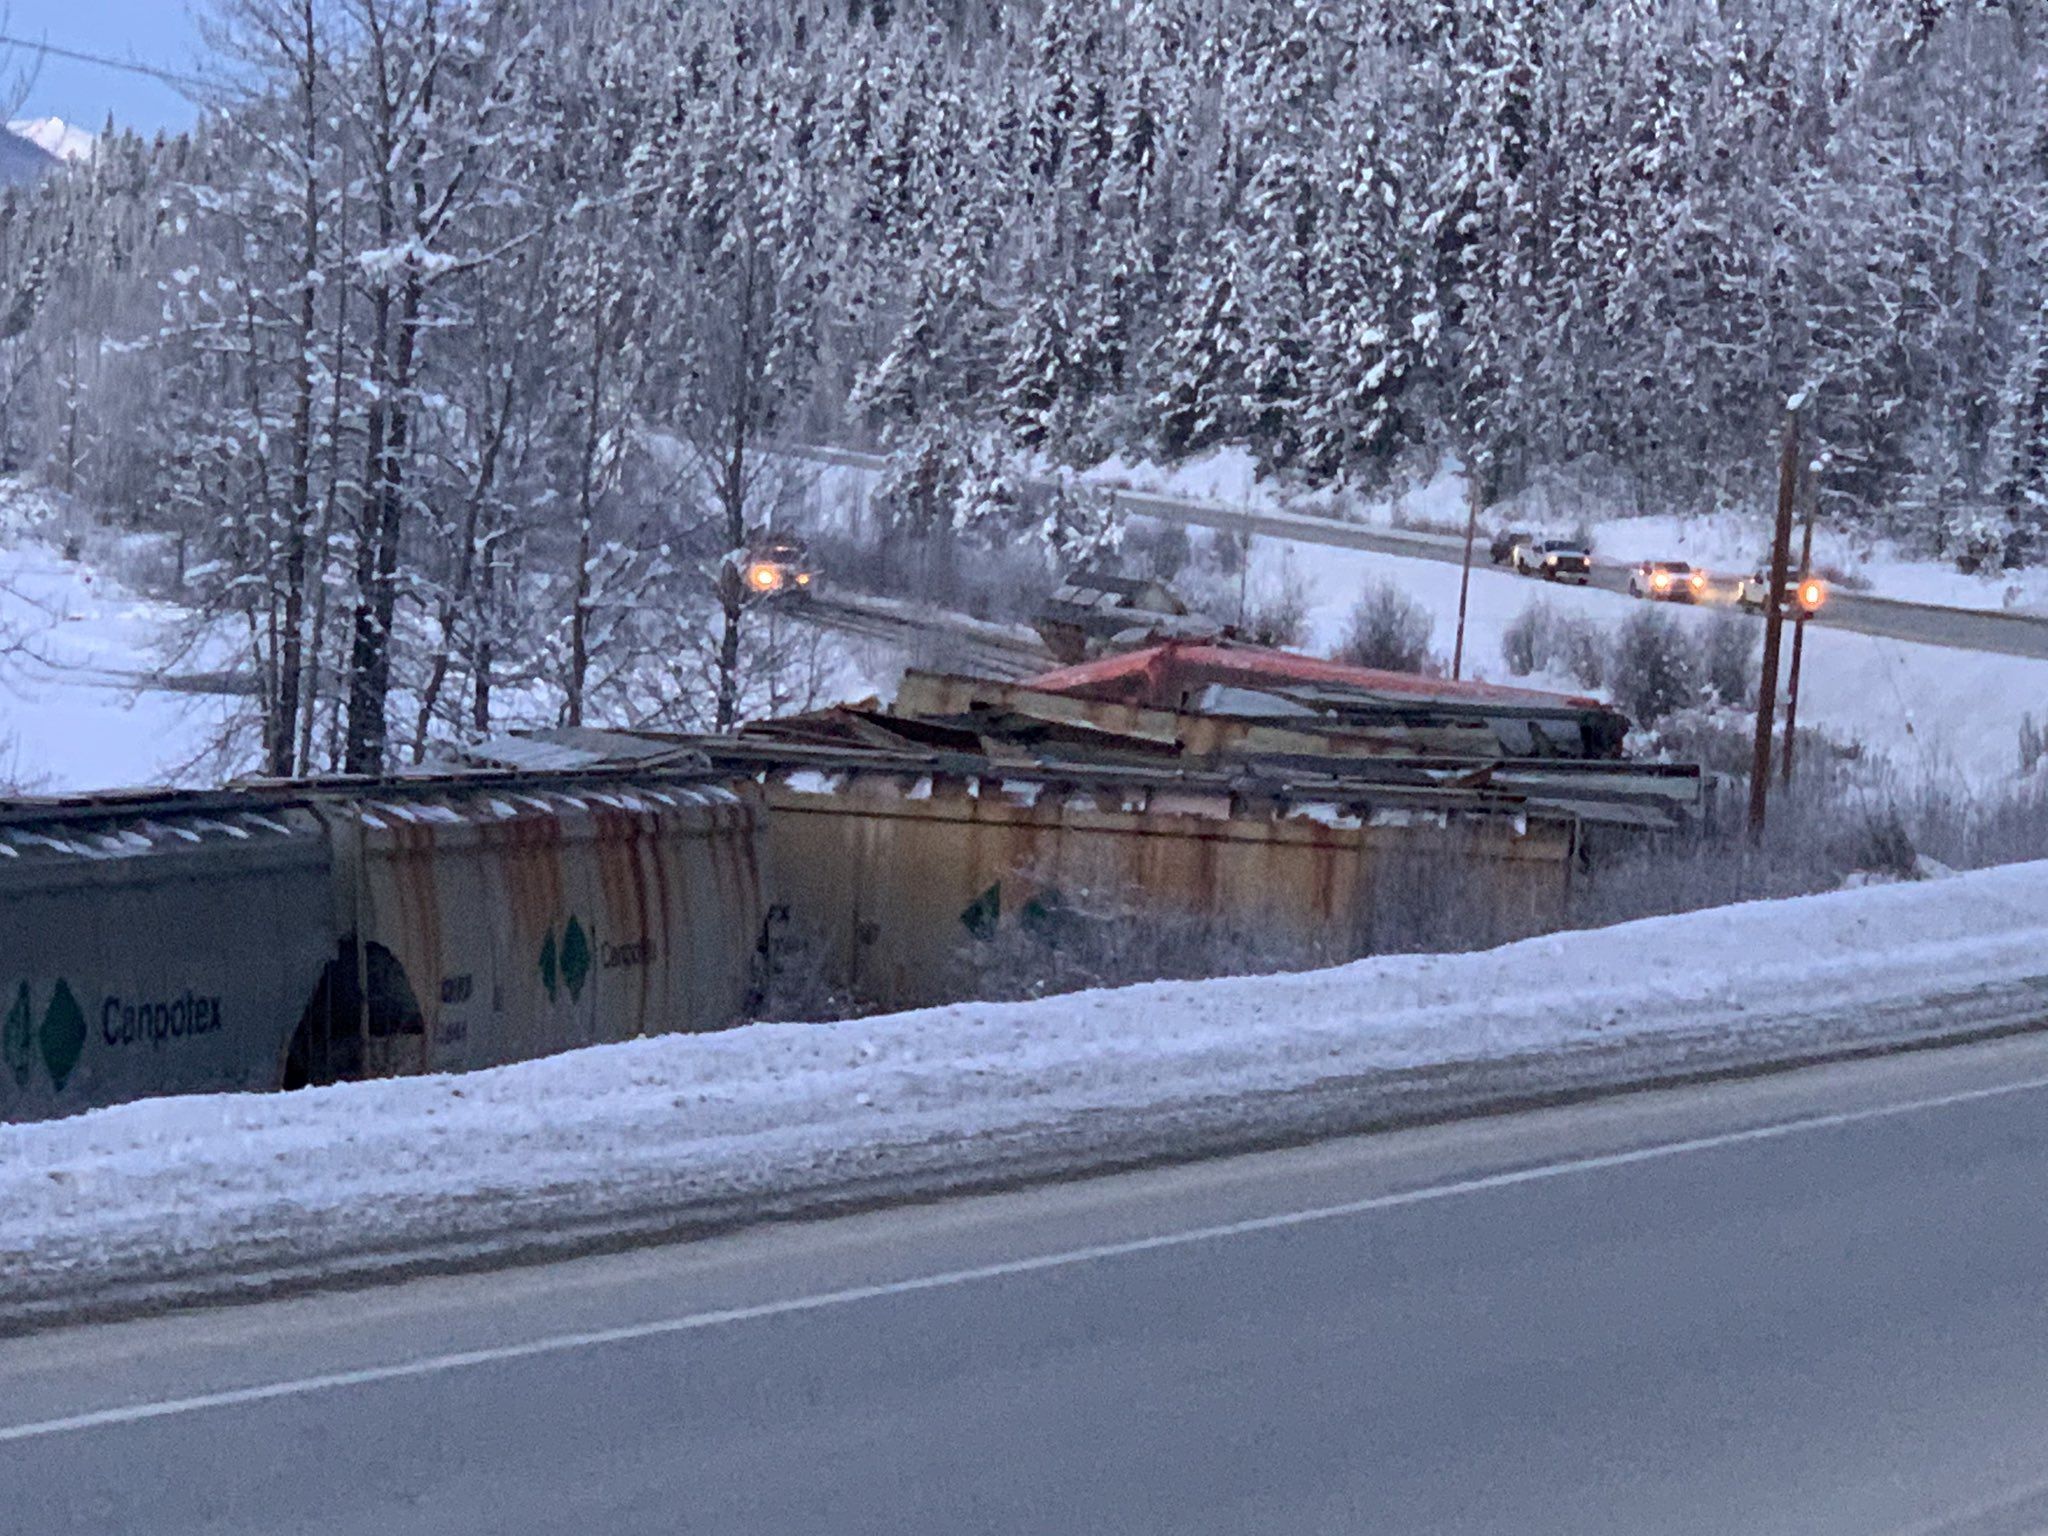 No Injuries Reported After 26 Cn Railcars Derail In Fraser Fort George B C Globalnews Ca